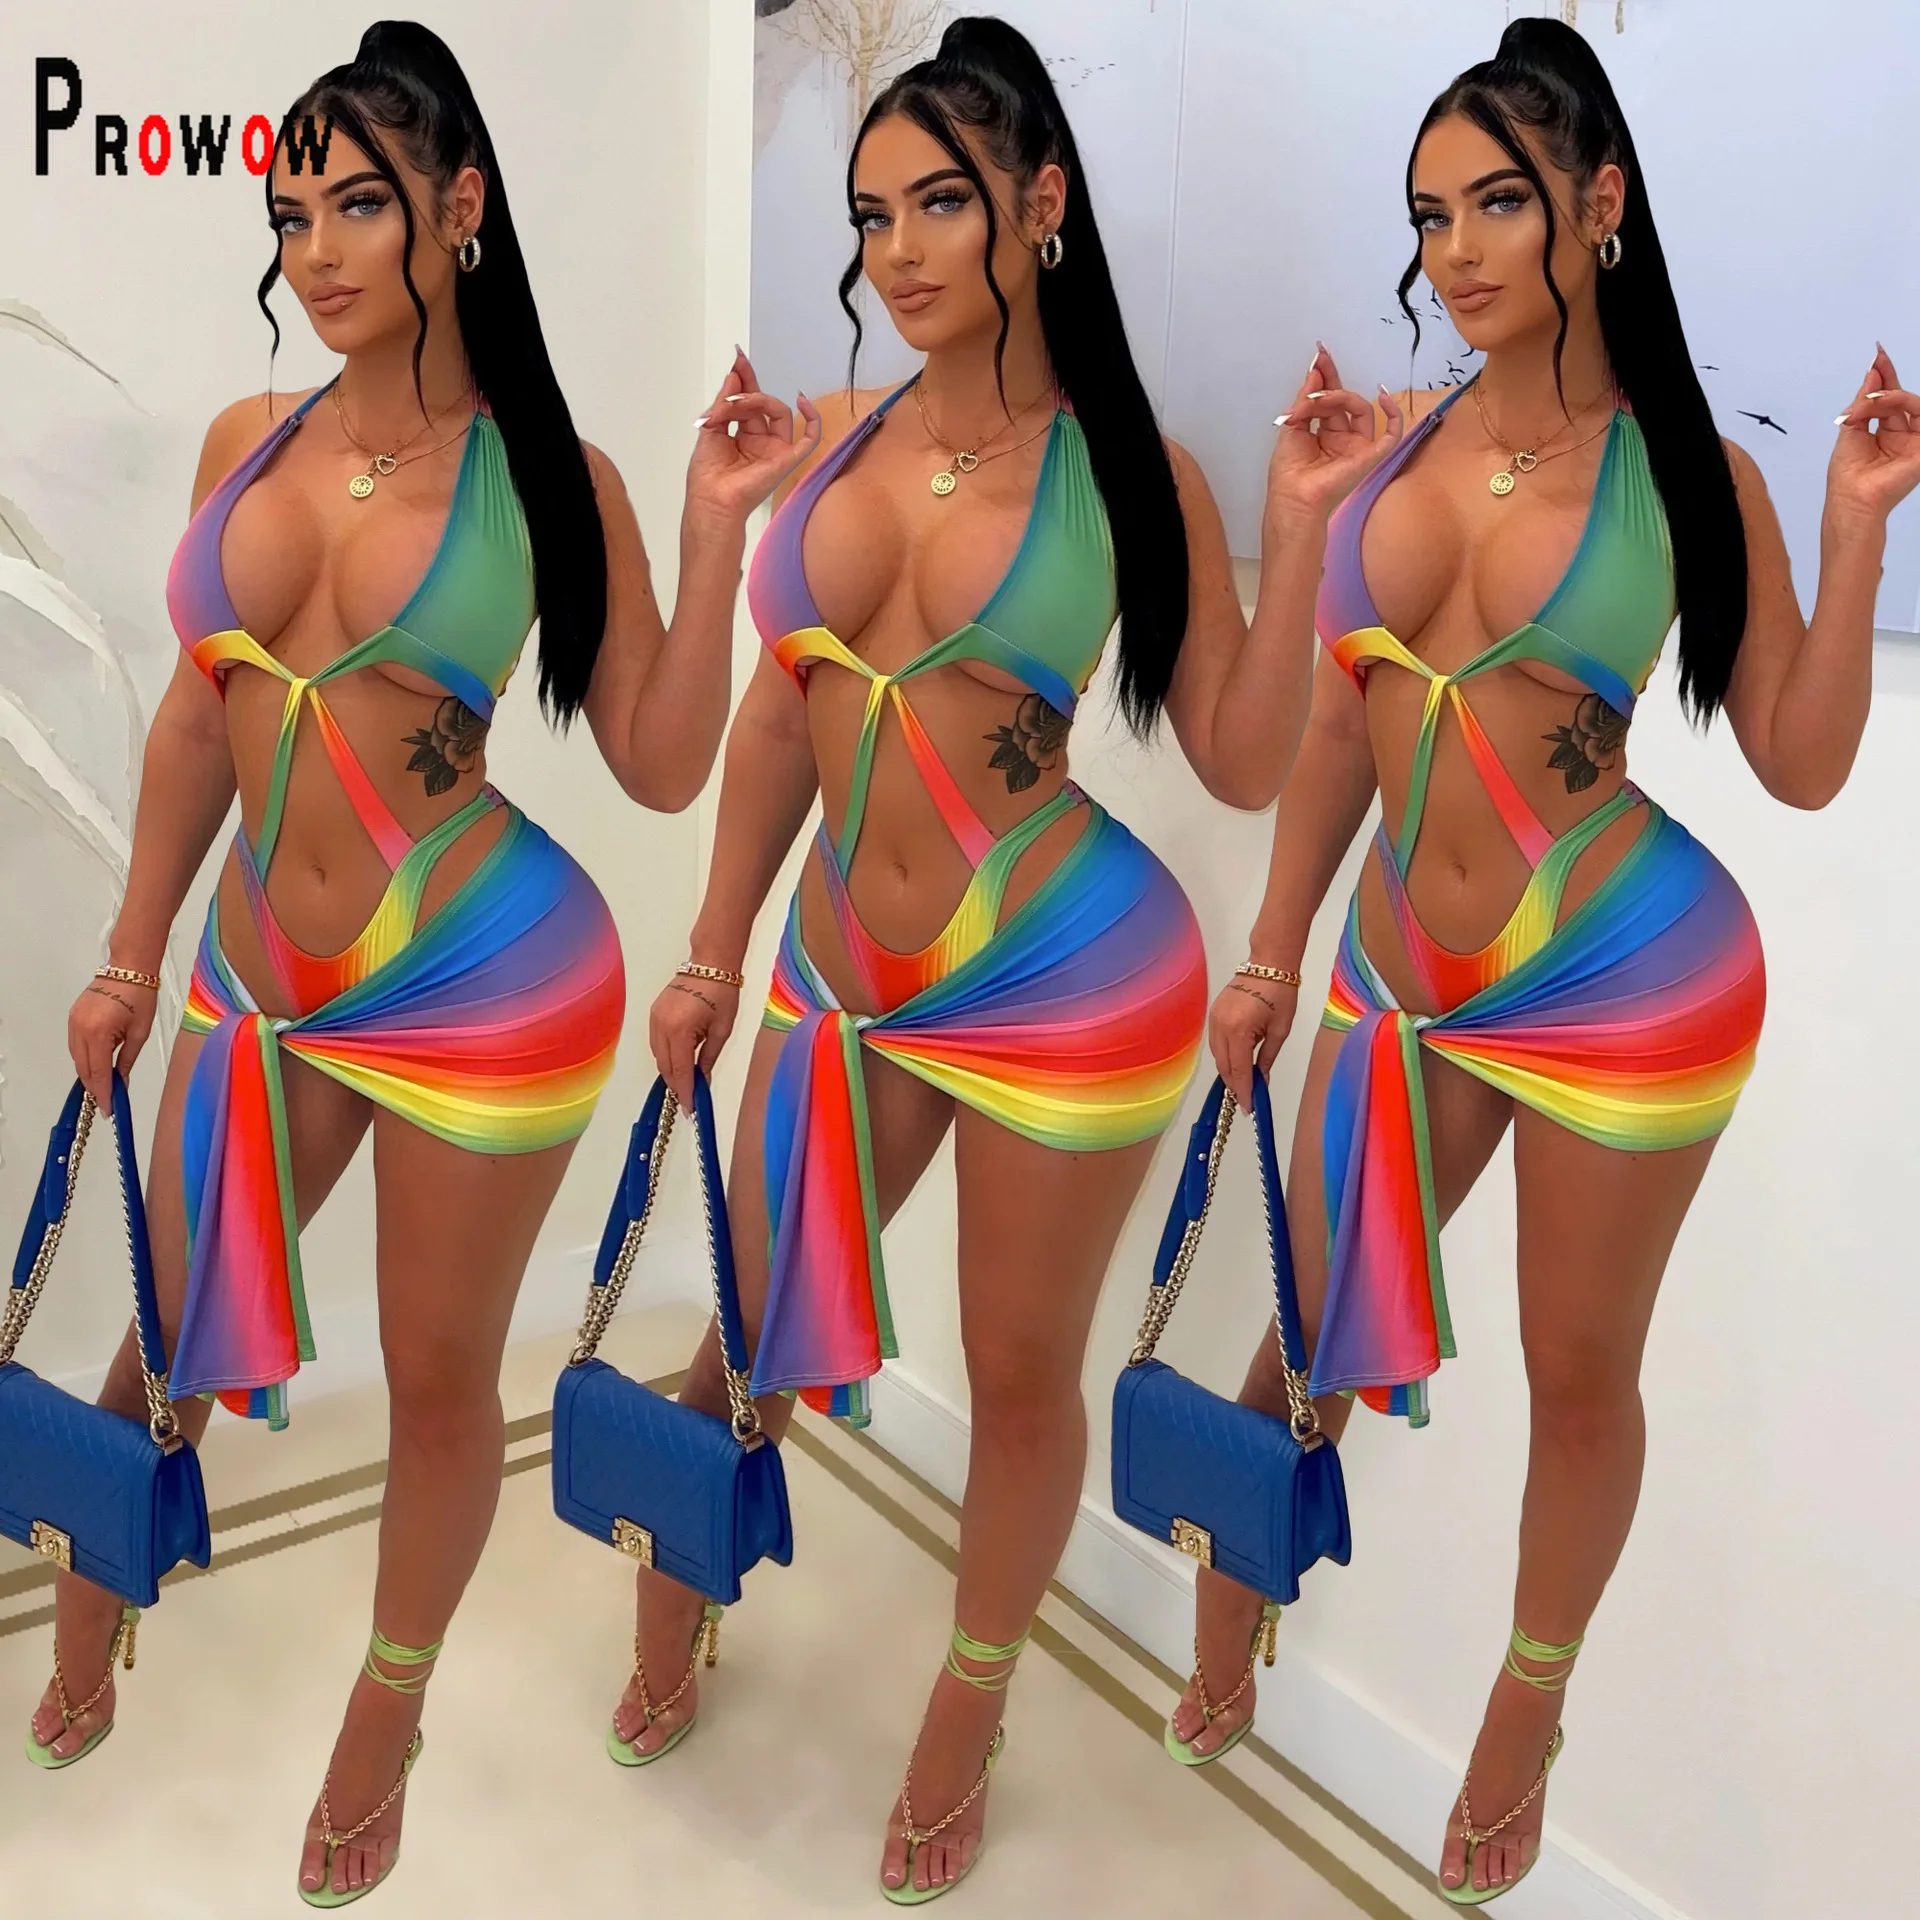 

Prowow Women Bikinis Set Rainbow Colorful Criss-Cross Lace Up Bodysuit Cover-ups 2 Piece Swimsuits 2022 New Summer Beach Outfits